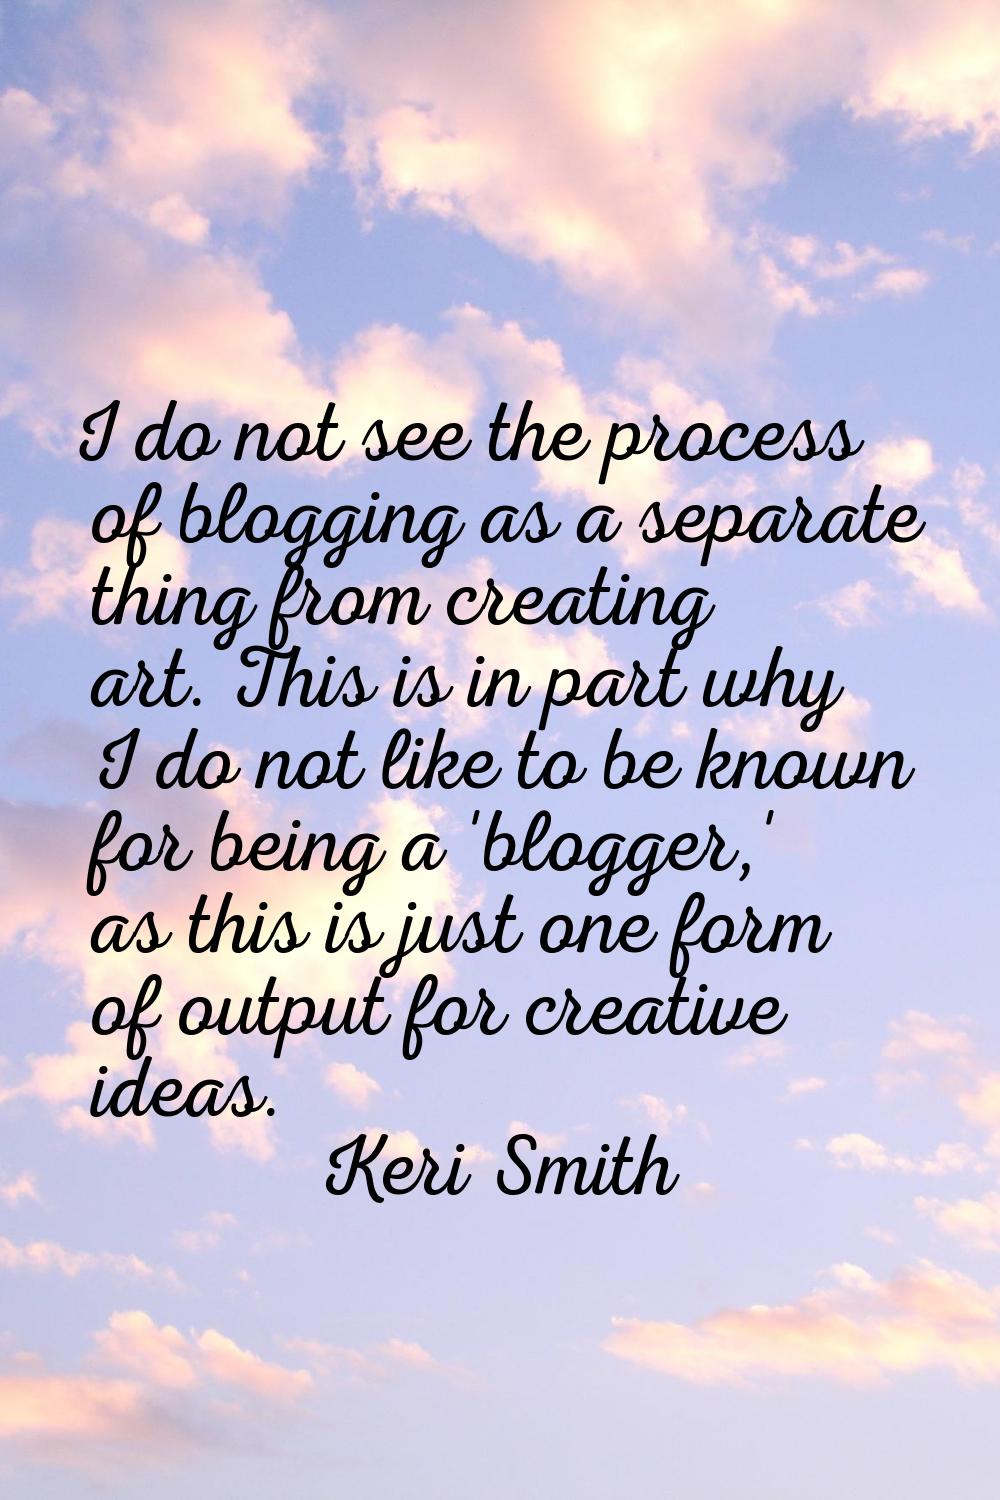 I do not see the process of blogging as a separate thing from creating art. This is in part why I d